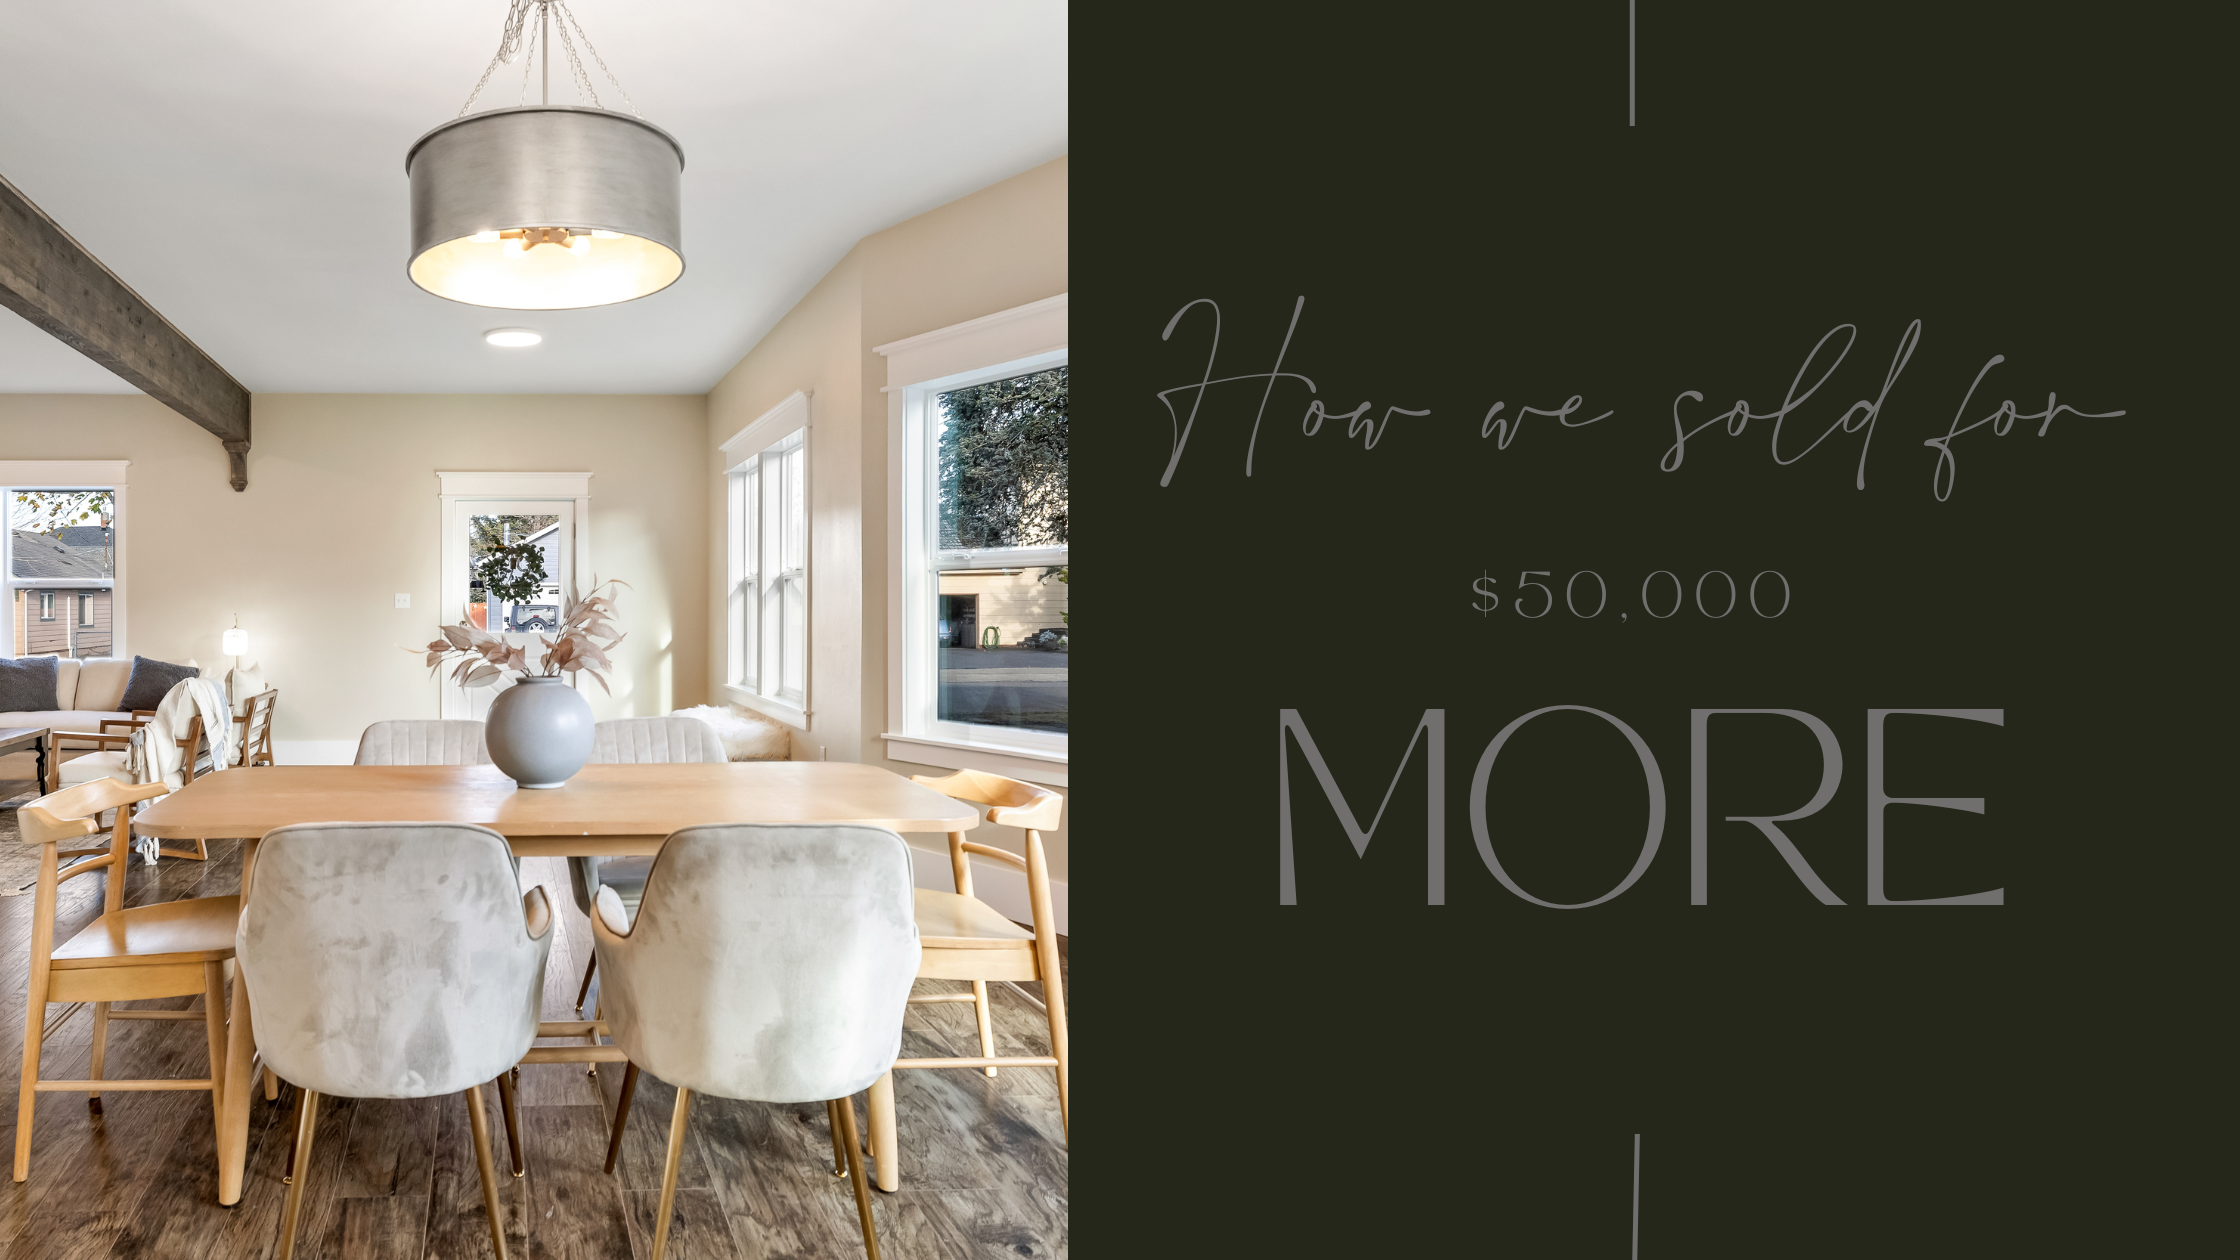 How We Sold the Home for $50,000 more